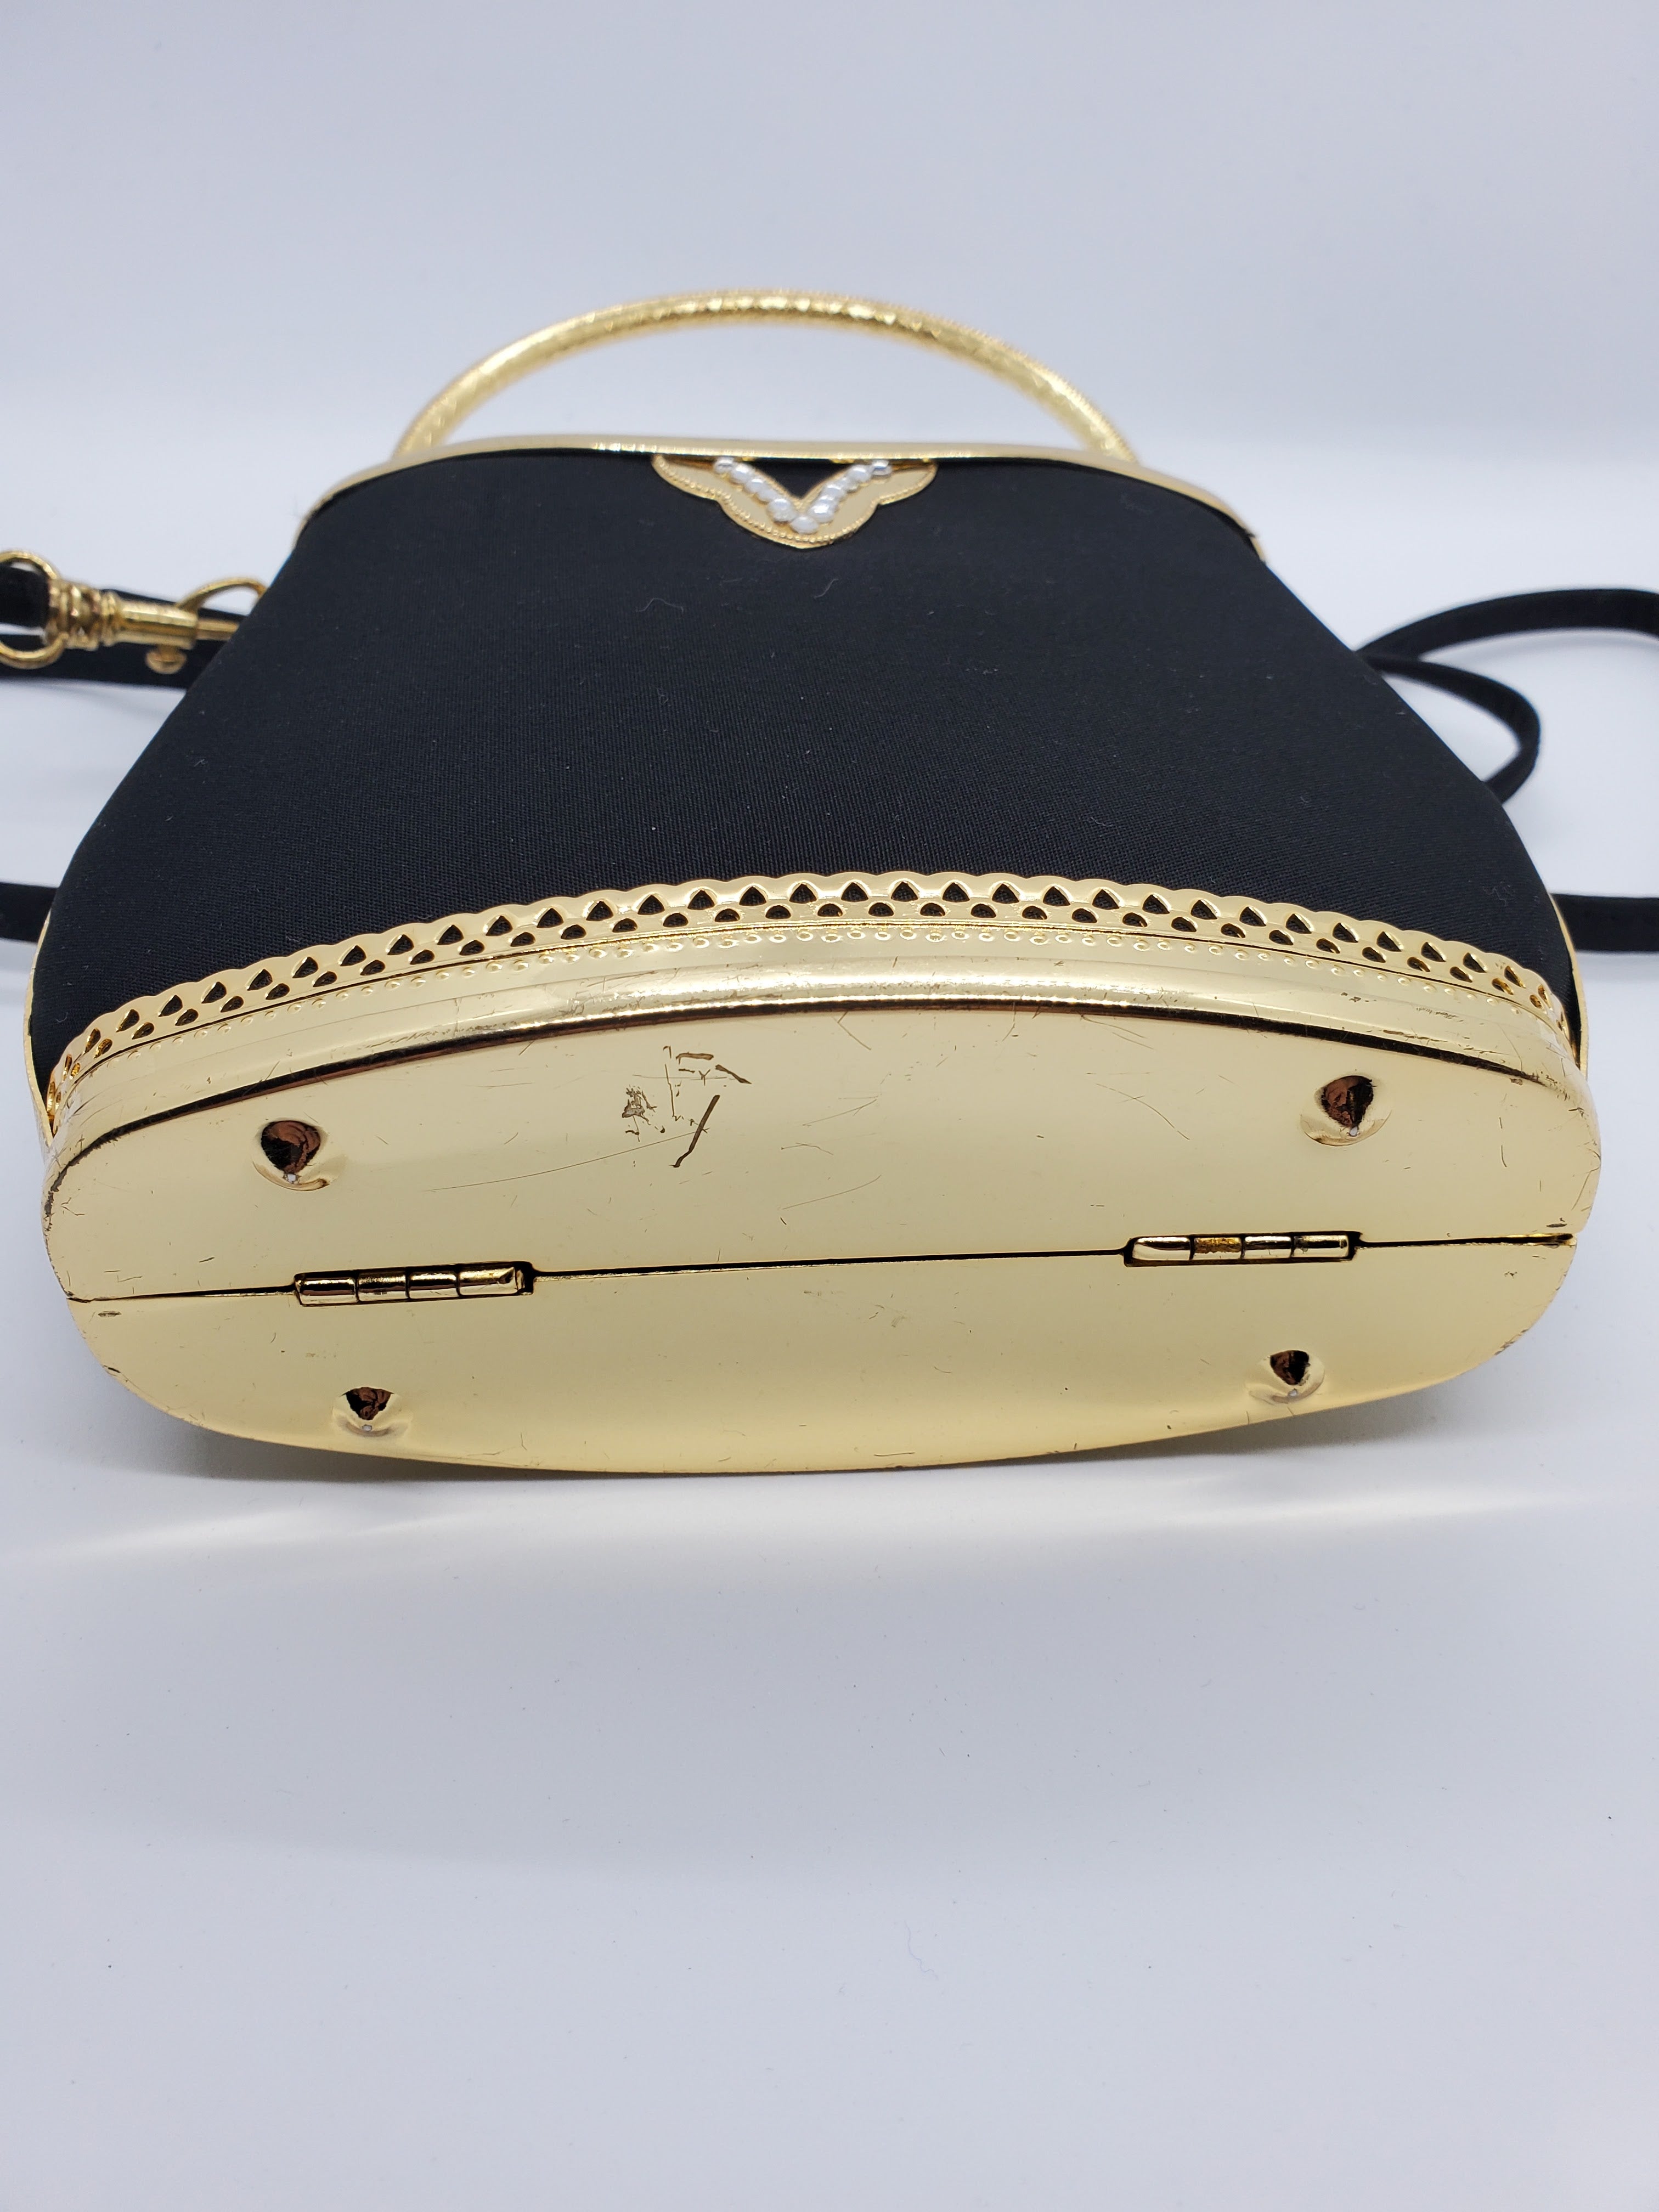 Bottom view of Smooth black handbag with ornate gold frame and handle with rhinestone accents and crossbody strap